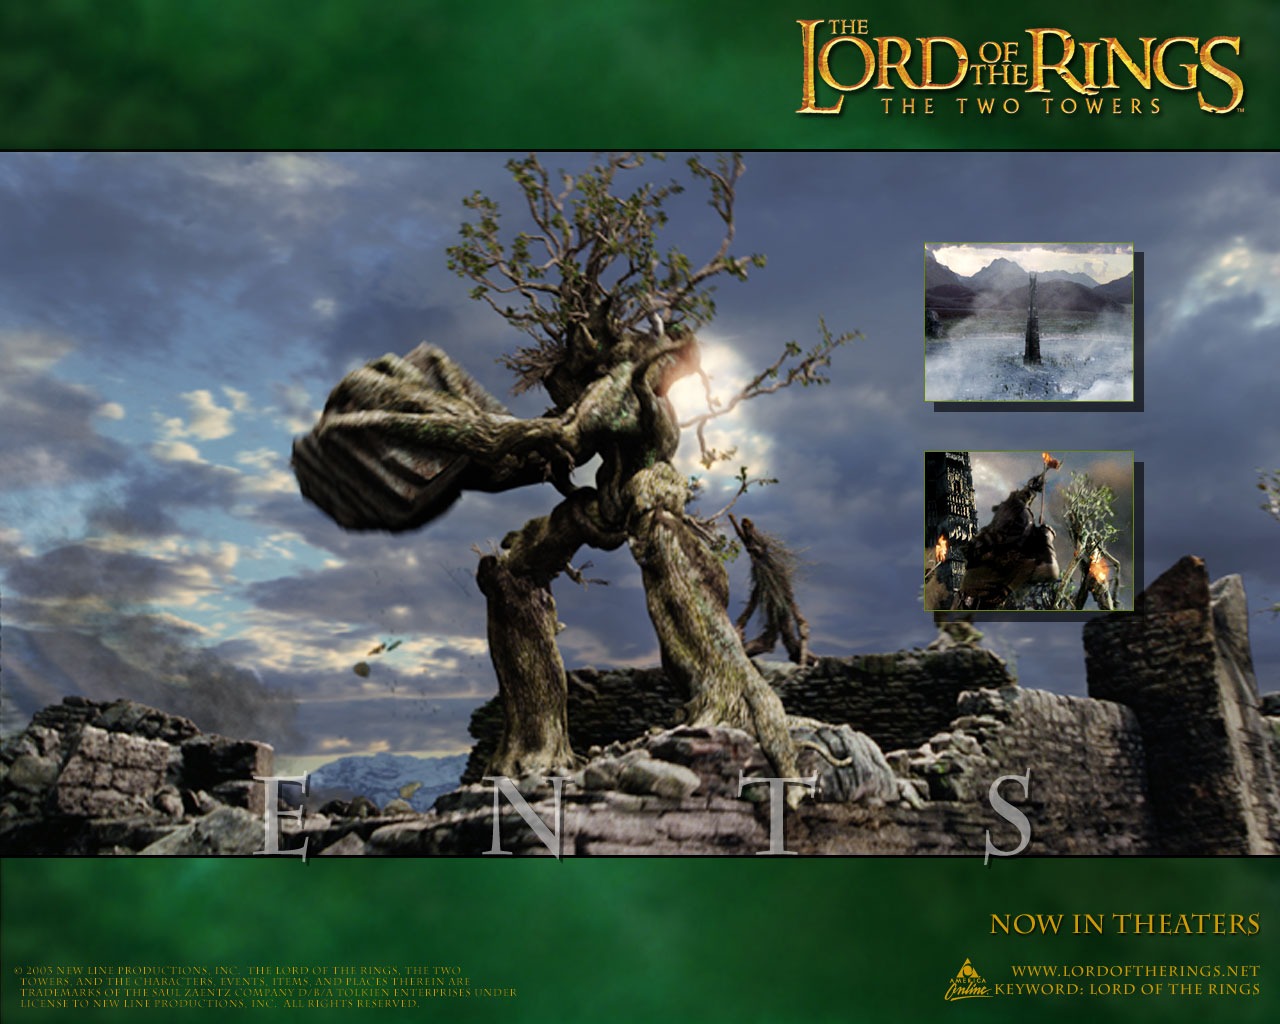 The Lord of the Rings wallpaper #13 - 1280x1024